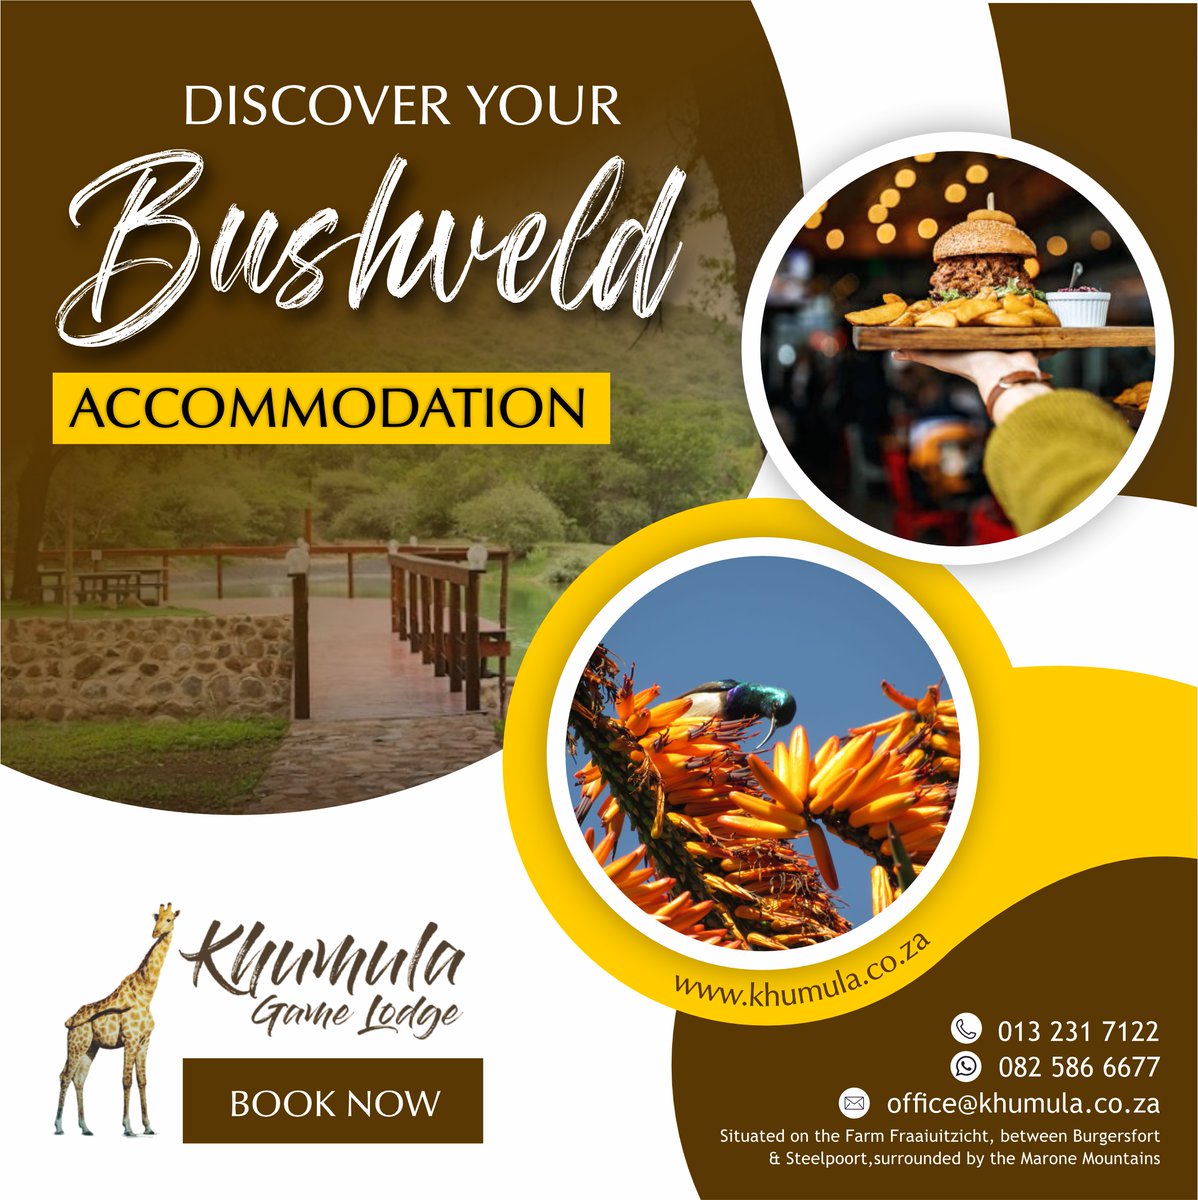 Bushveld Bliss at Khumula Lodge! Our deck boasts a scenic view of a breathtaking dam and mountain, as well as encounters with free-roaming antelopes, all while you indulge in the best woodfire oven pizzas. 
#KhumulaLodge #AffordableBushRetreat #Wildlife #ScenicViews